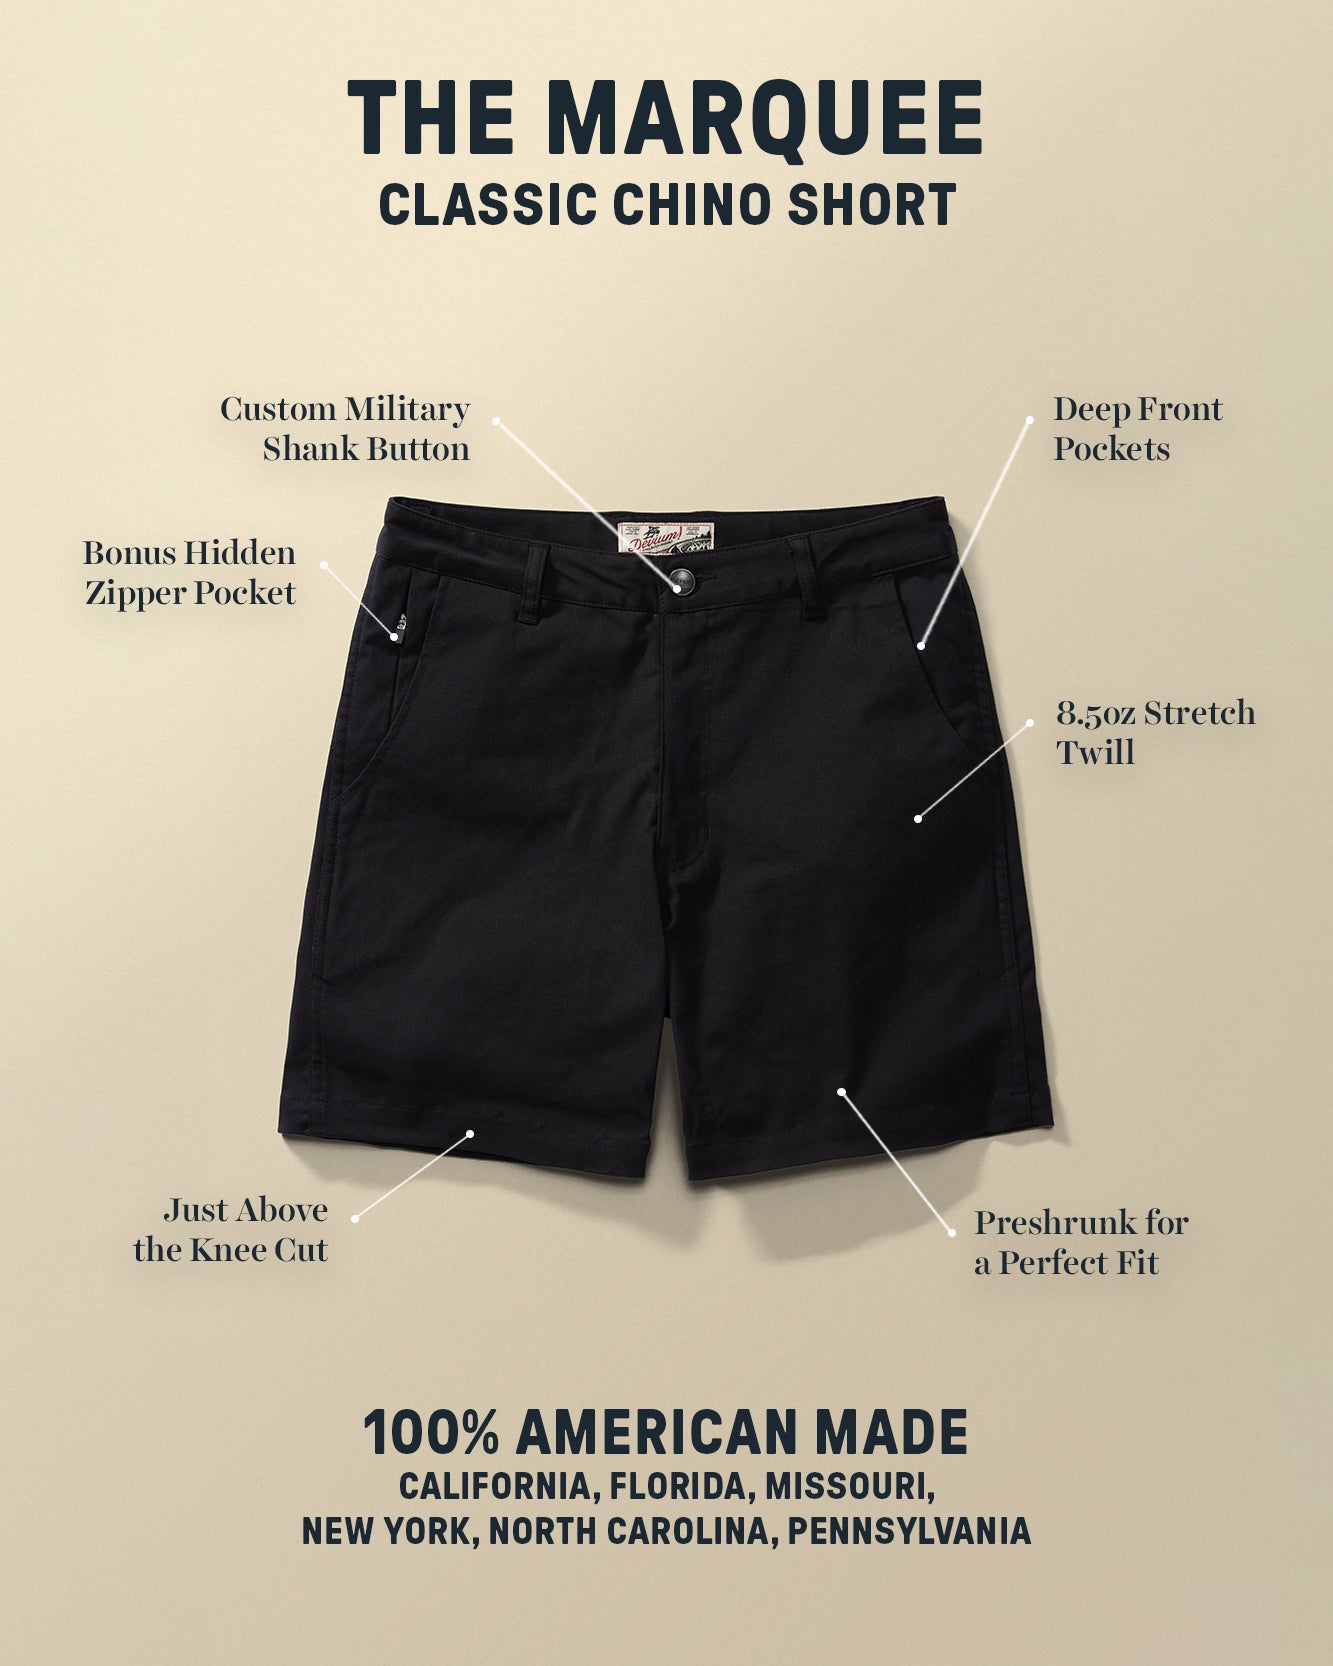 Marquee Classic Chino Short